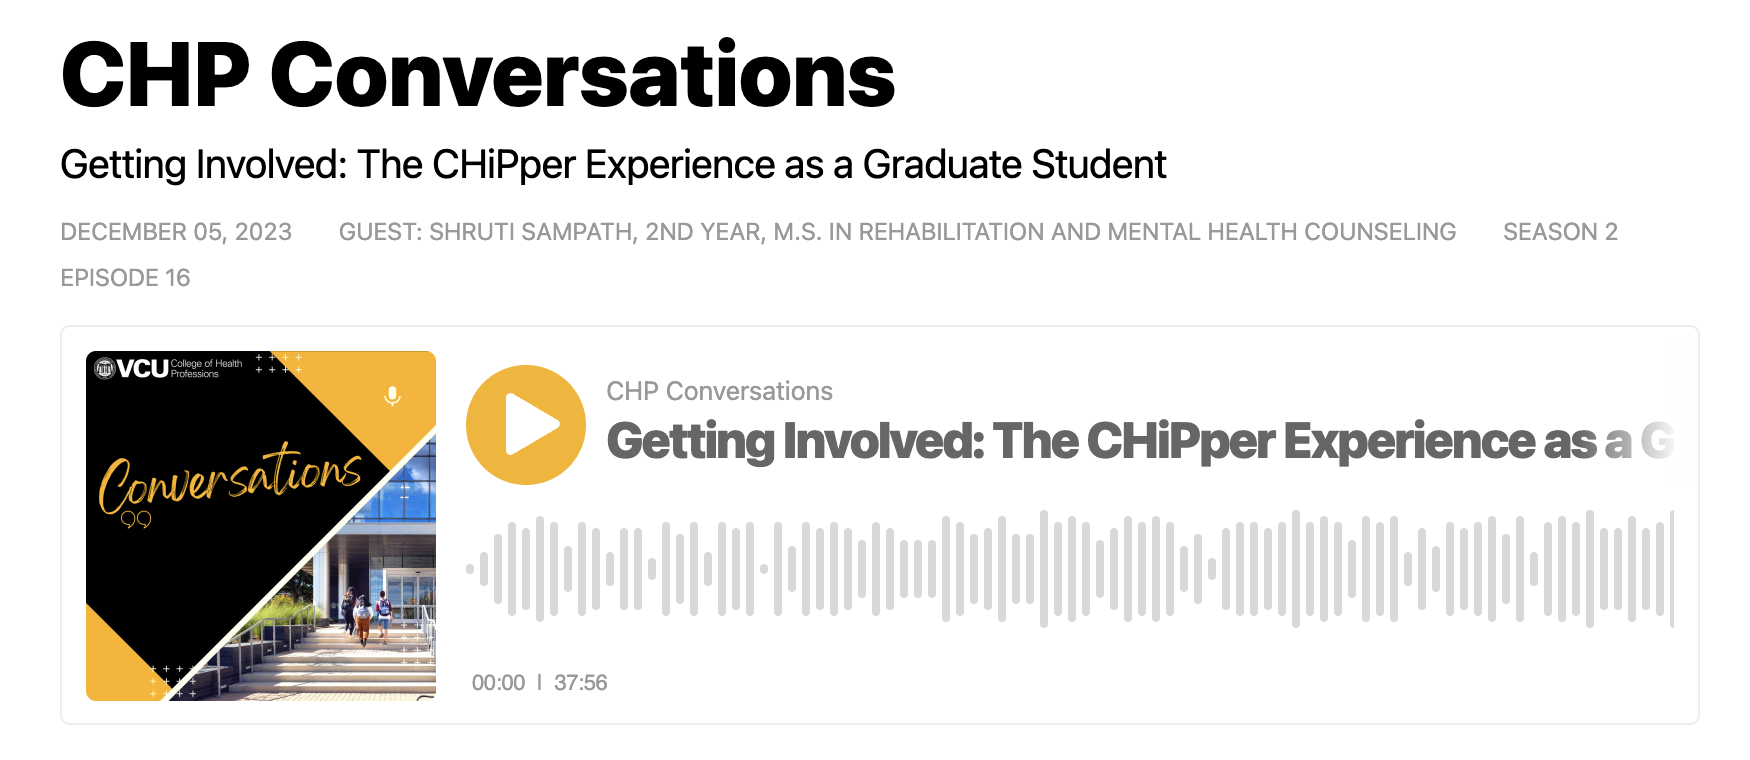 Getting Involved: The CHiPper Experience as a Graduate Student